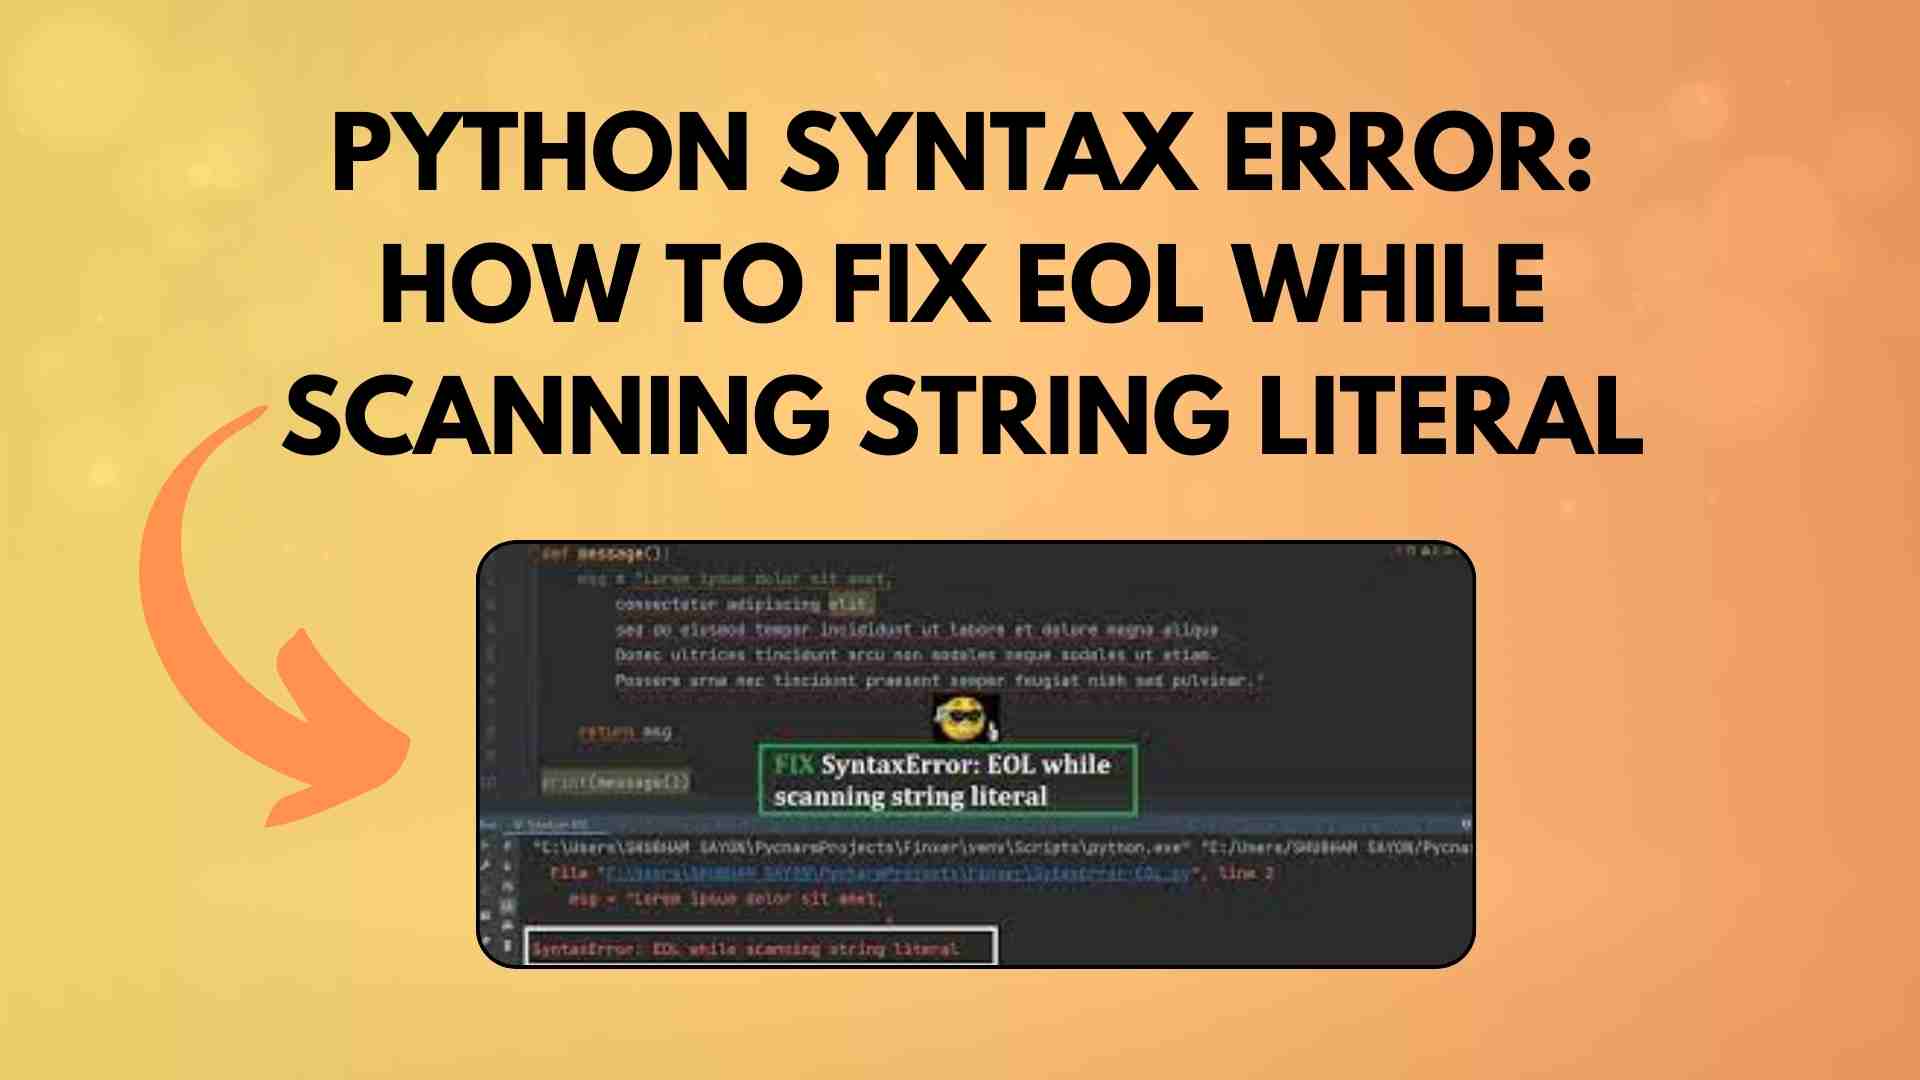 Python Syntax Error: How to Fix EOL While Scanning String Literal